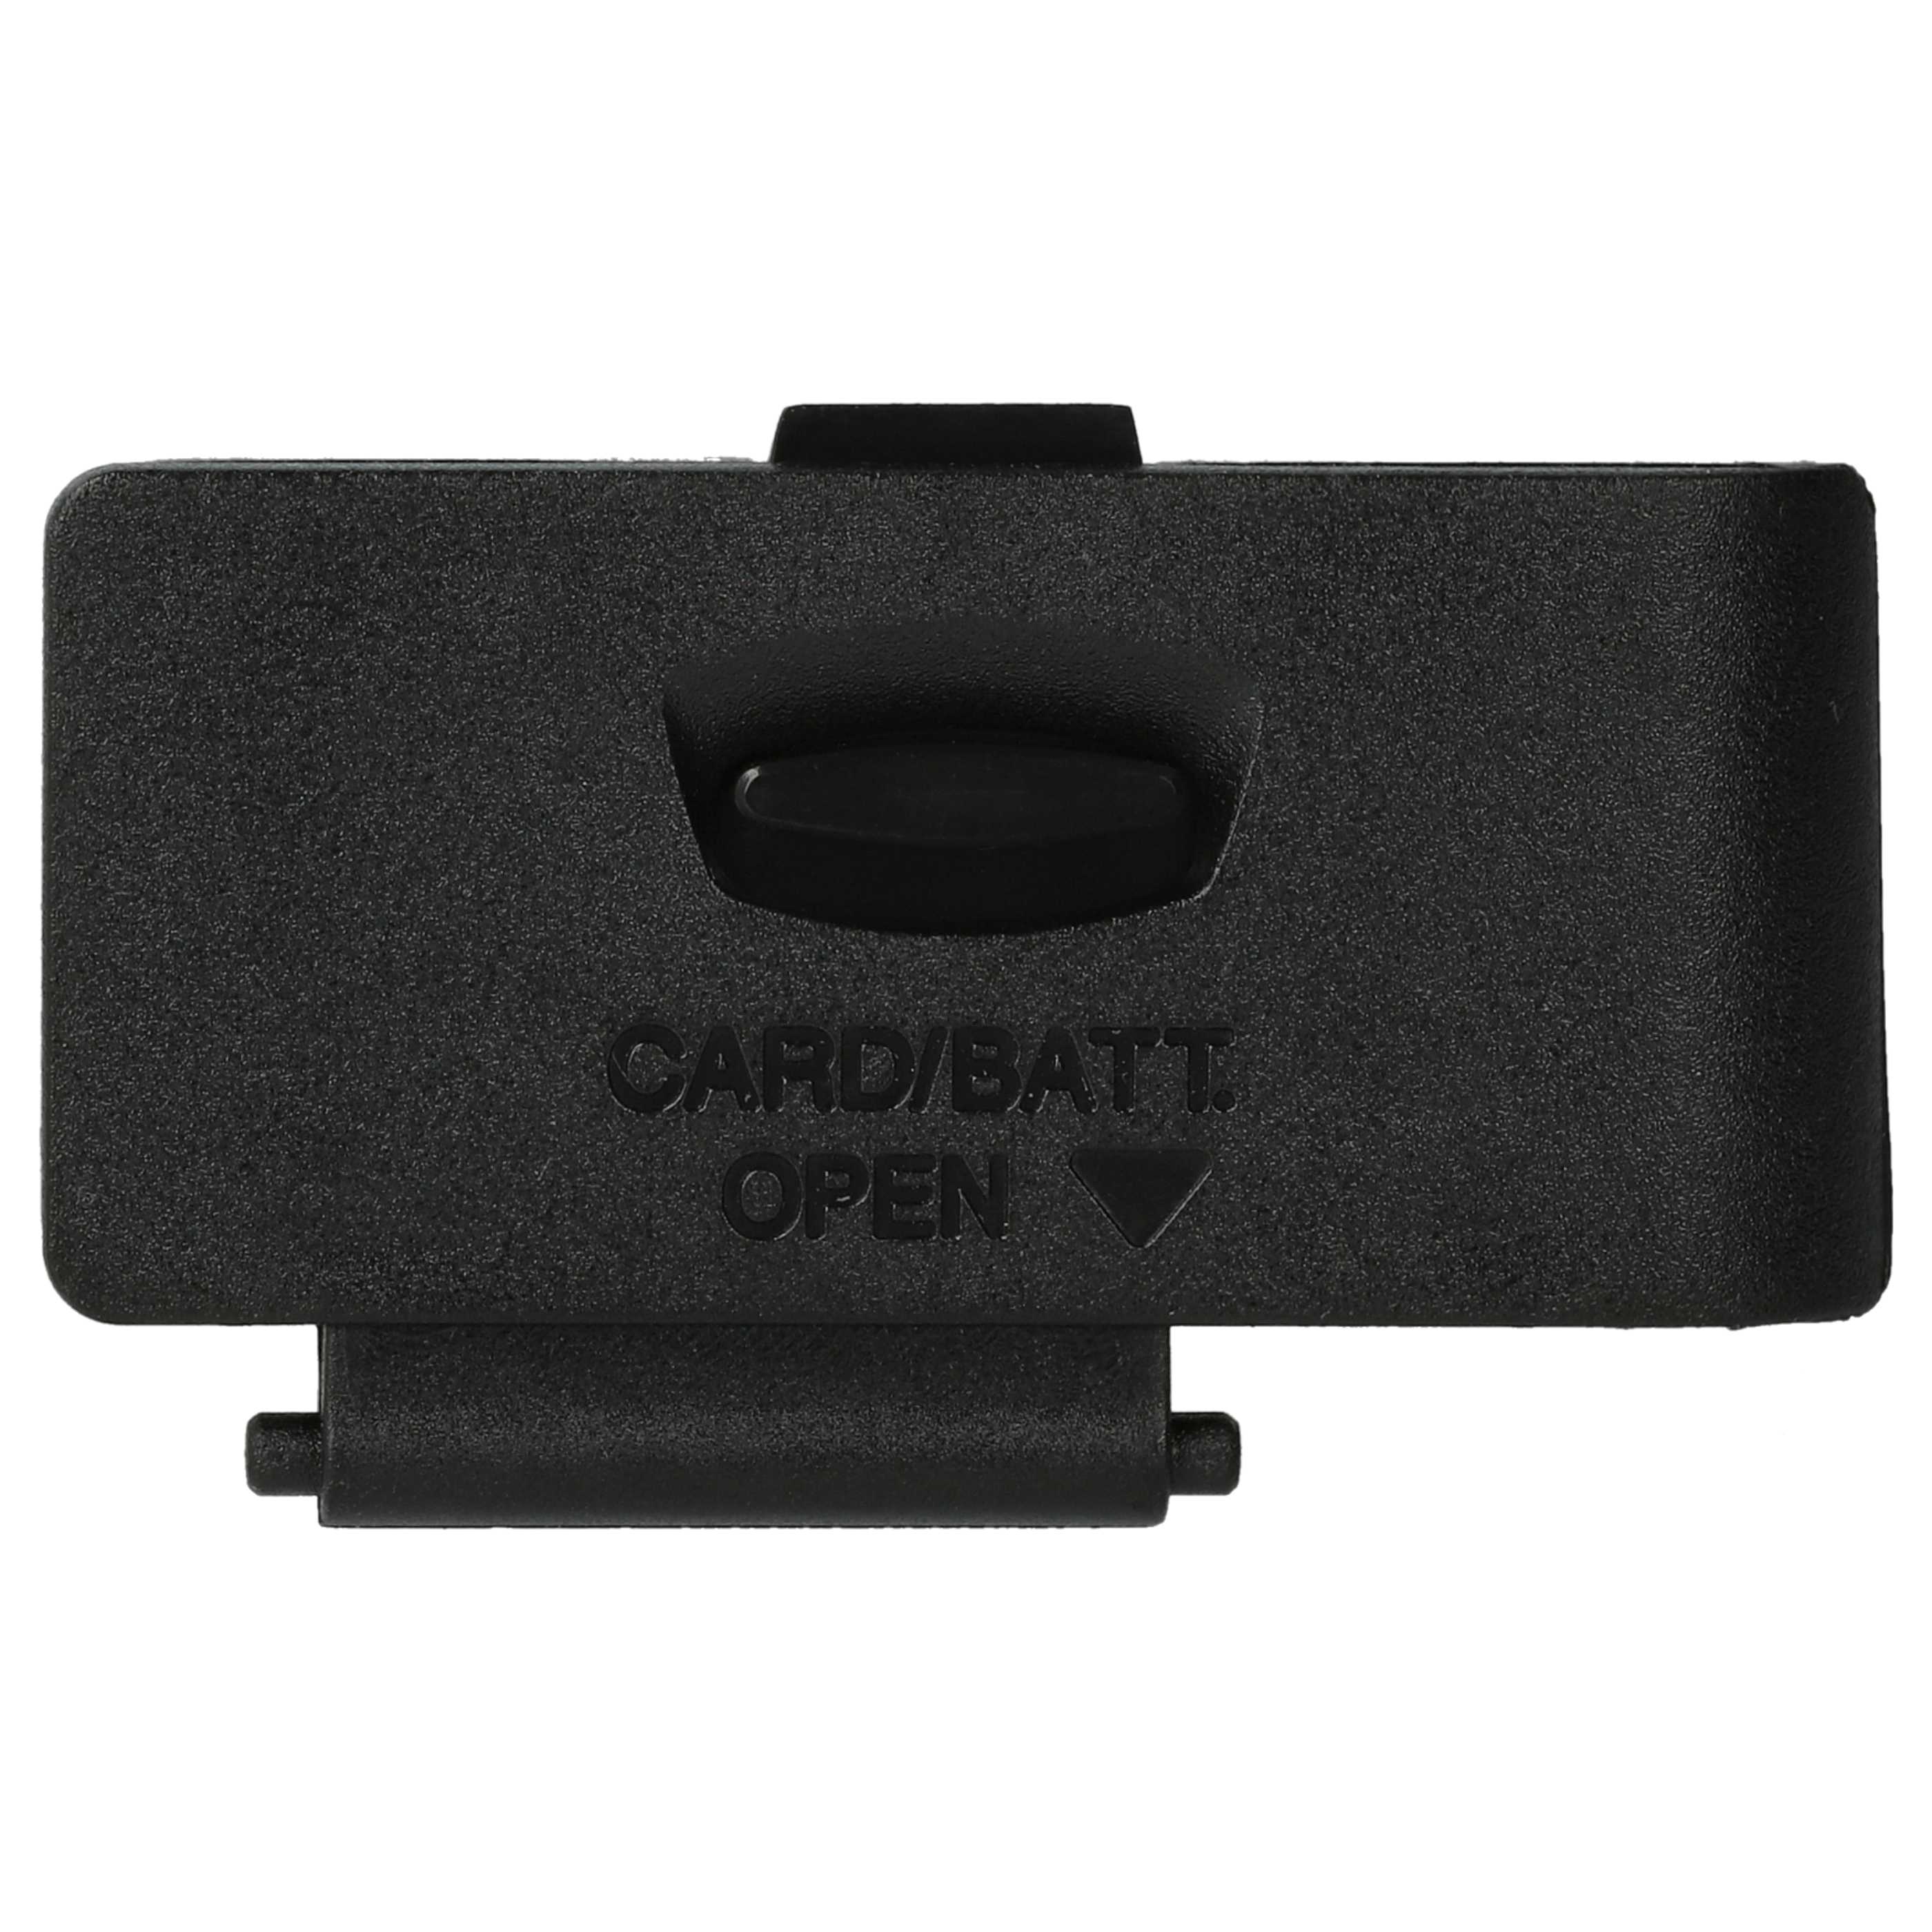 Battery Door Cover suitable for Canon EOS Rebel T3, Rebel T5, Kiss X50, Kiss X70, 1200D, 1100D Camera, Battery